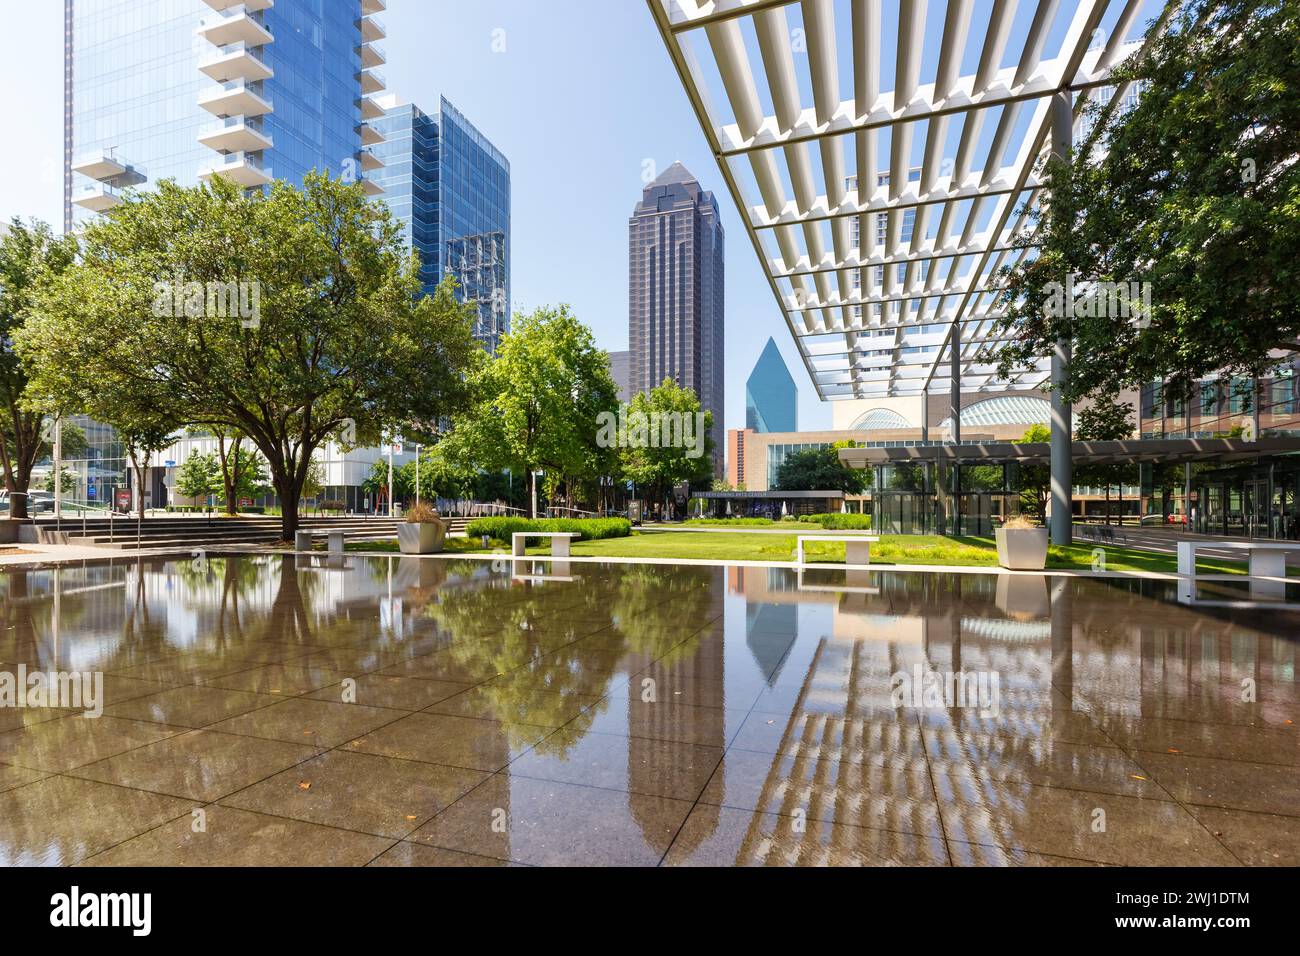 Dallas Performing Arts Center Theater Building in Texas, USA Stock Photo